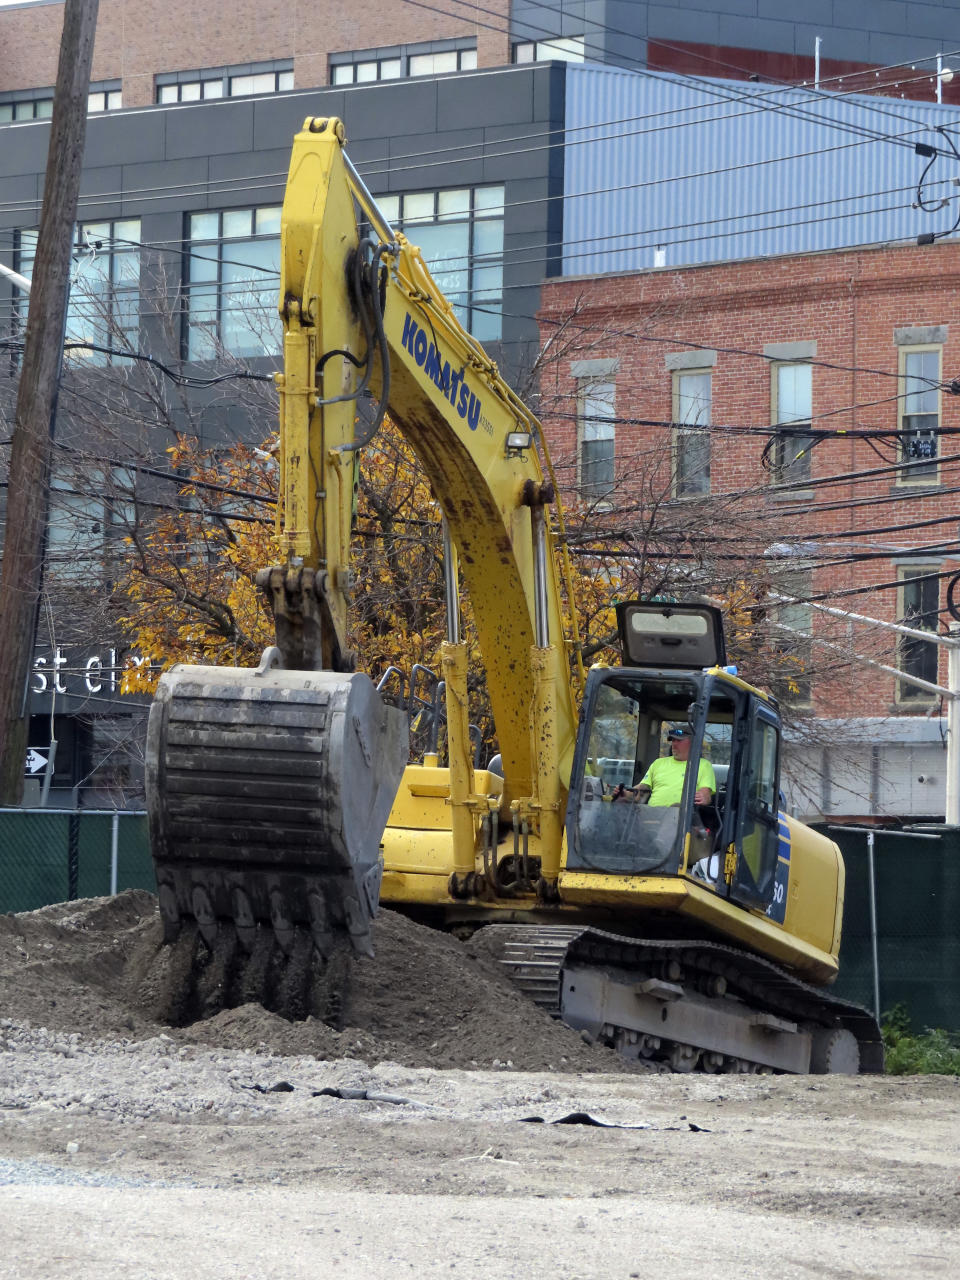 Workers using heavy equipment dig at a site near the Hudson River in Hoboken, N.J., on Wednesday, Oct. 25, 2023, as part of two large flood control projects that began this day that were envisioned in the aftermath of Superstorm Sandy's destruction. (AP Photo/Wayne Parry)